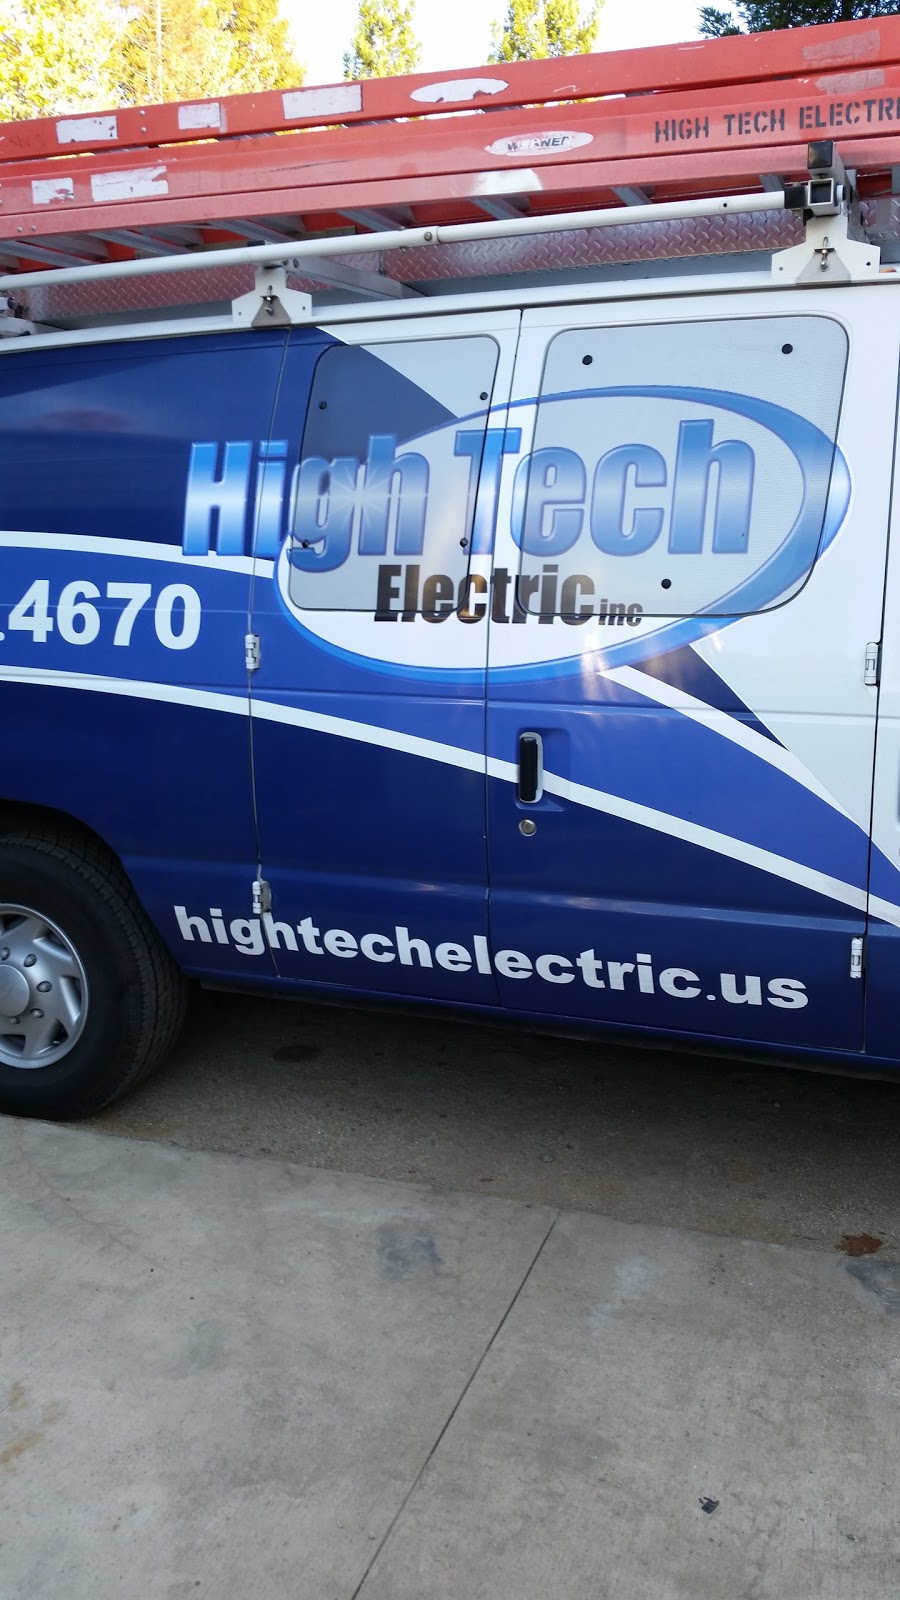 High Tech Electric | 3348 Swetzer Ct, Loomis, CA 95650 | Phone: (916) 663-4670